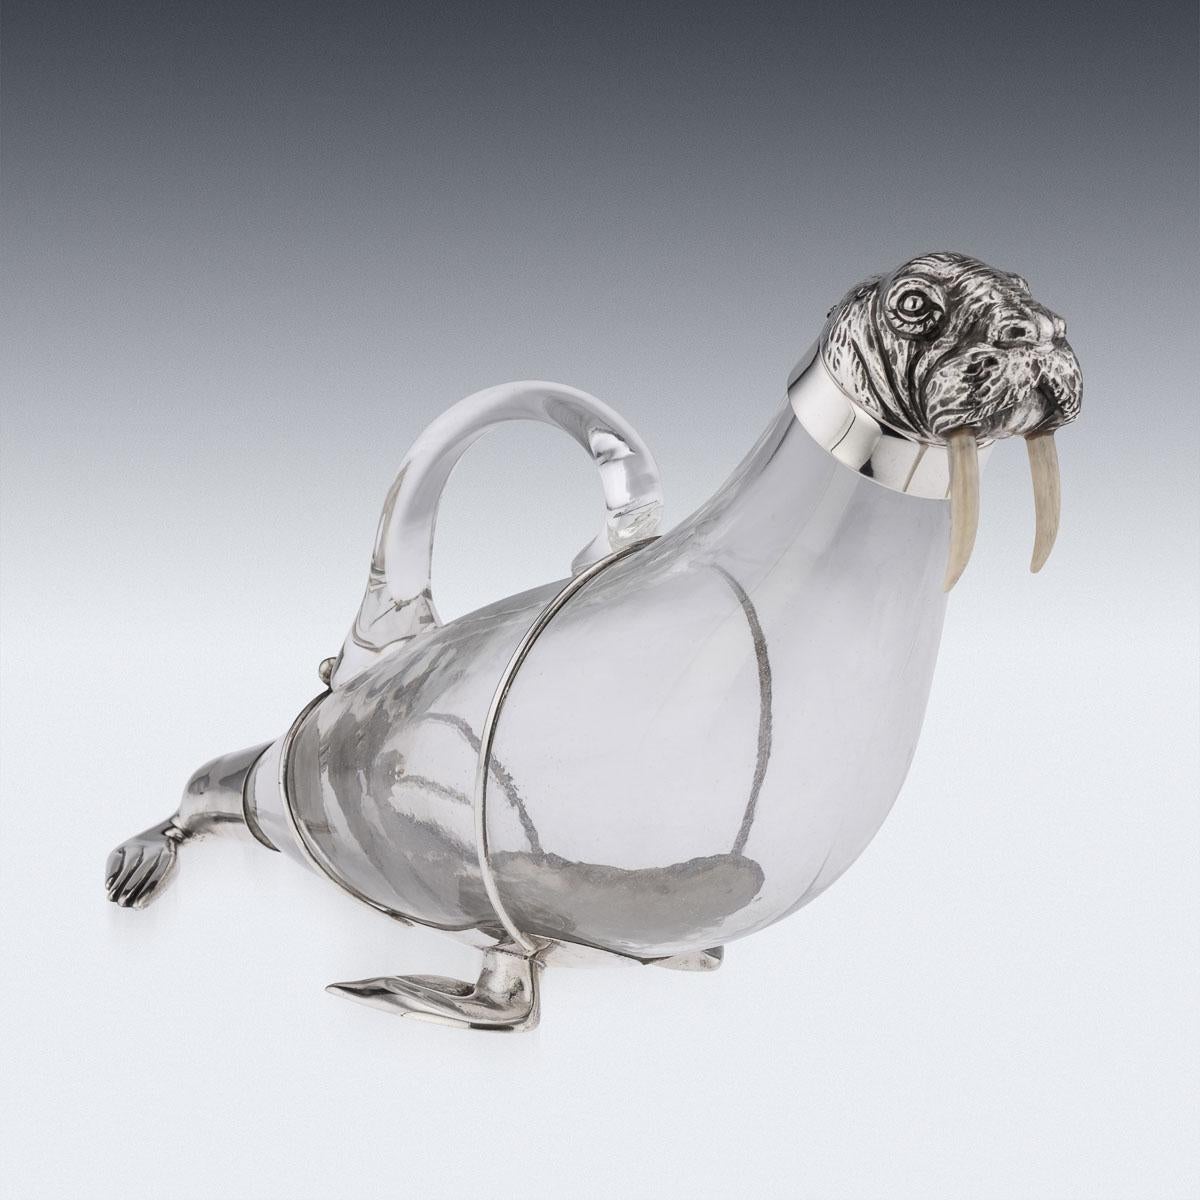 20th Century Italian silver & glass novelty wine decanter, the blown glass body and silver head beautifully imitating a walrus, the head made in two section with a hinged lid and mounted with tusks.
Hallmarked Italian Silver (925 Standard), Milan,